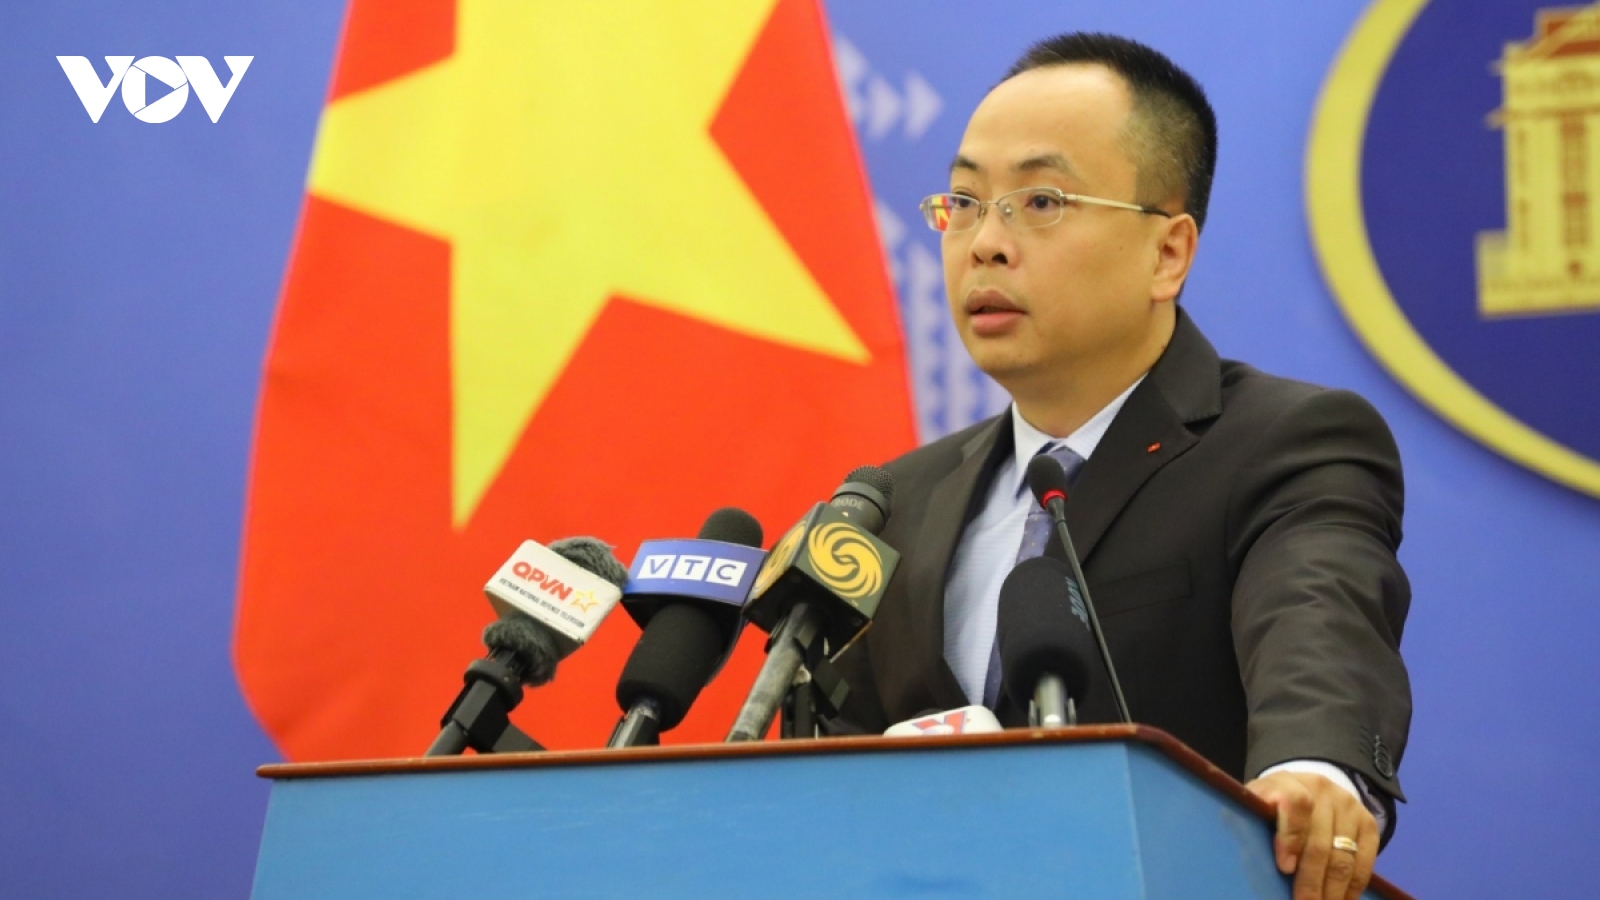 UPR report from UN agencies in Vietnam carries non-objective contents